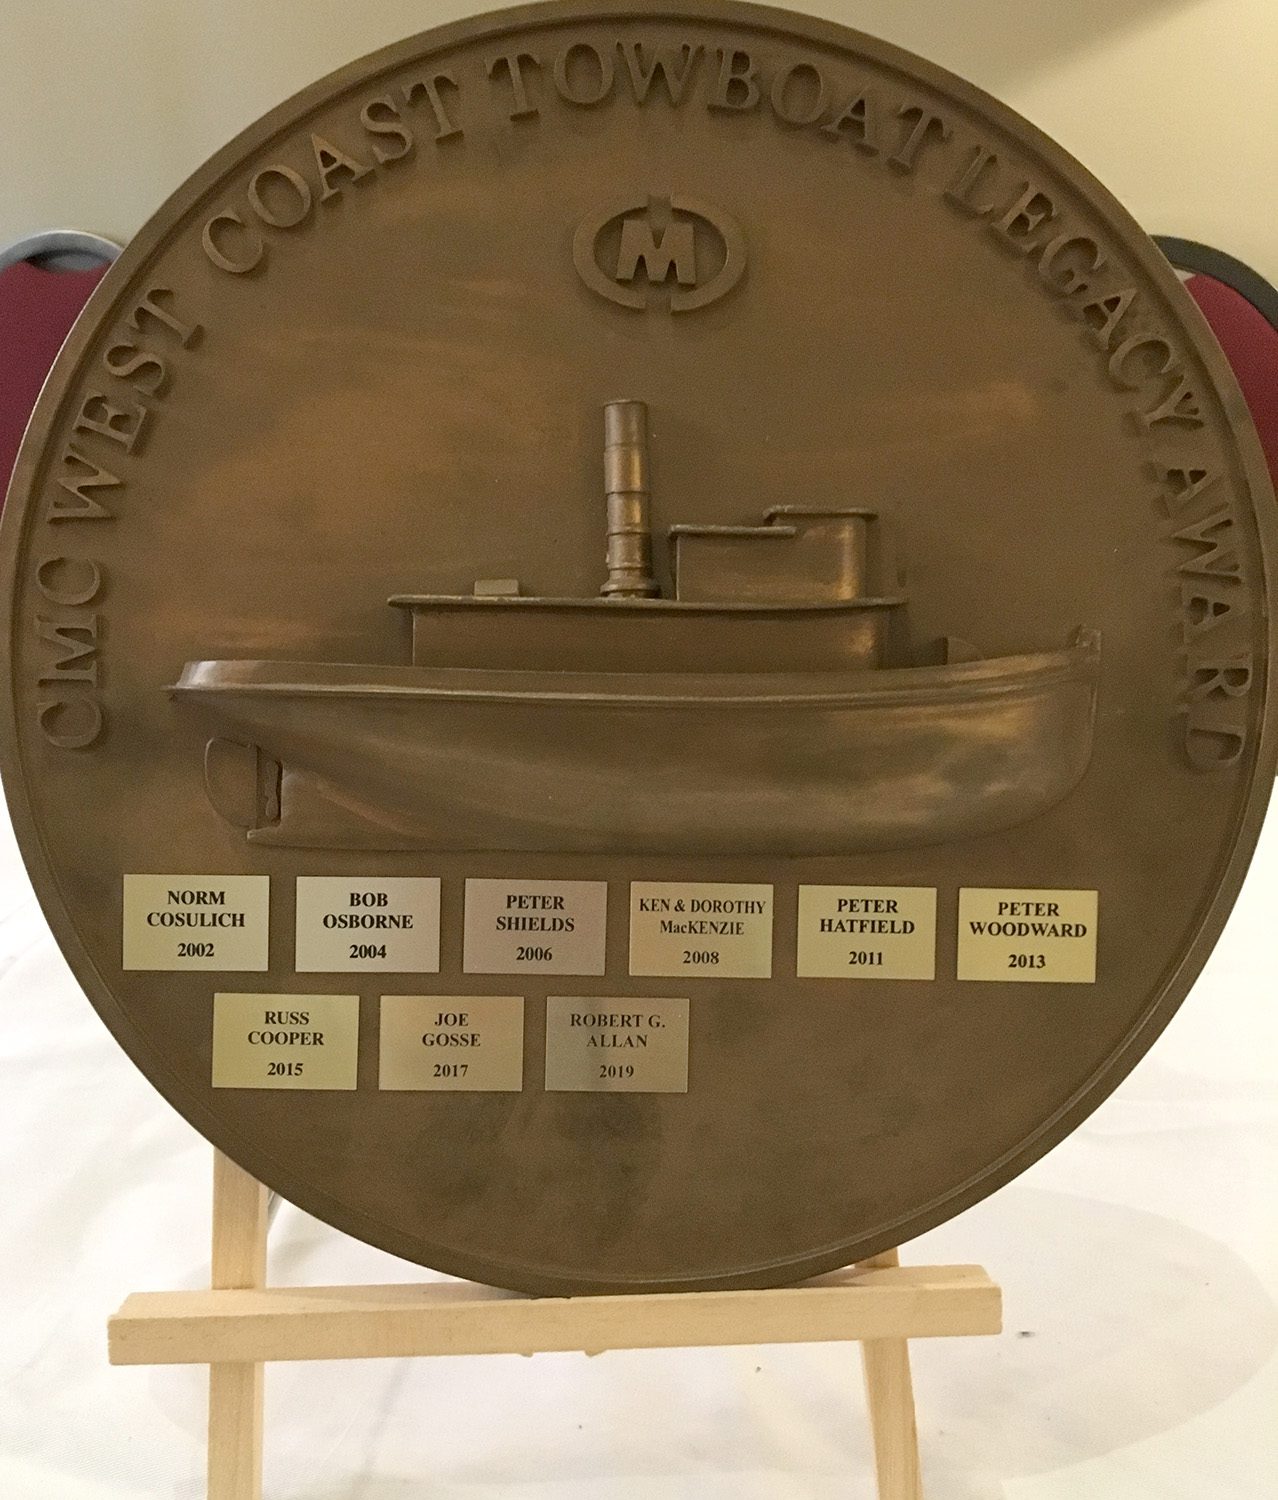 Robert G. Allan presented with CMC Legacy Award at the 23rd BC Tugboat Conference